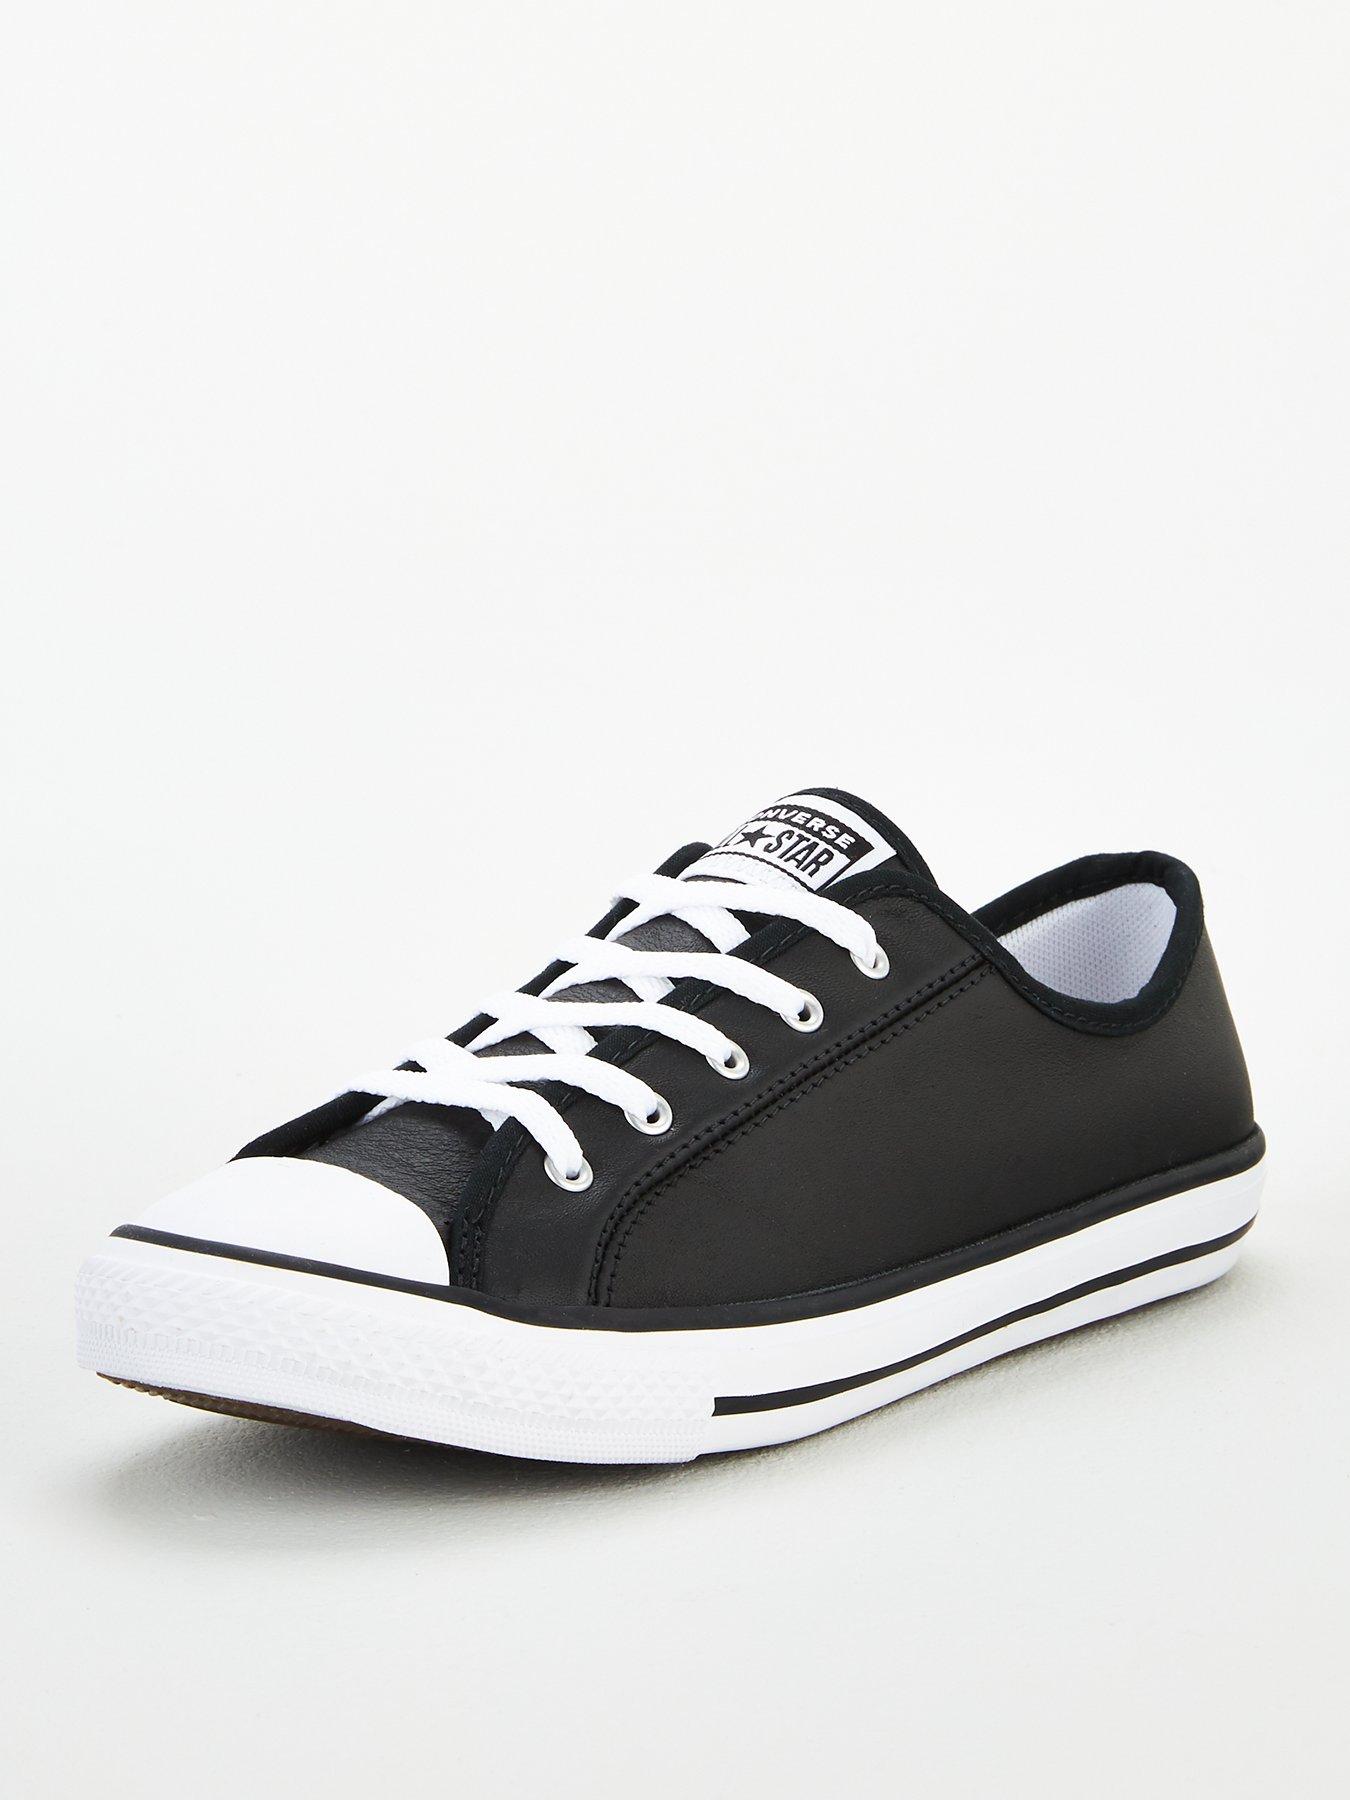 converse leather kw